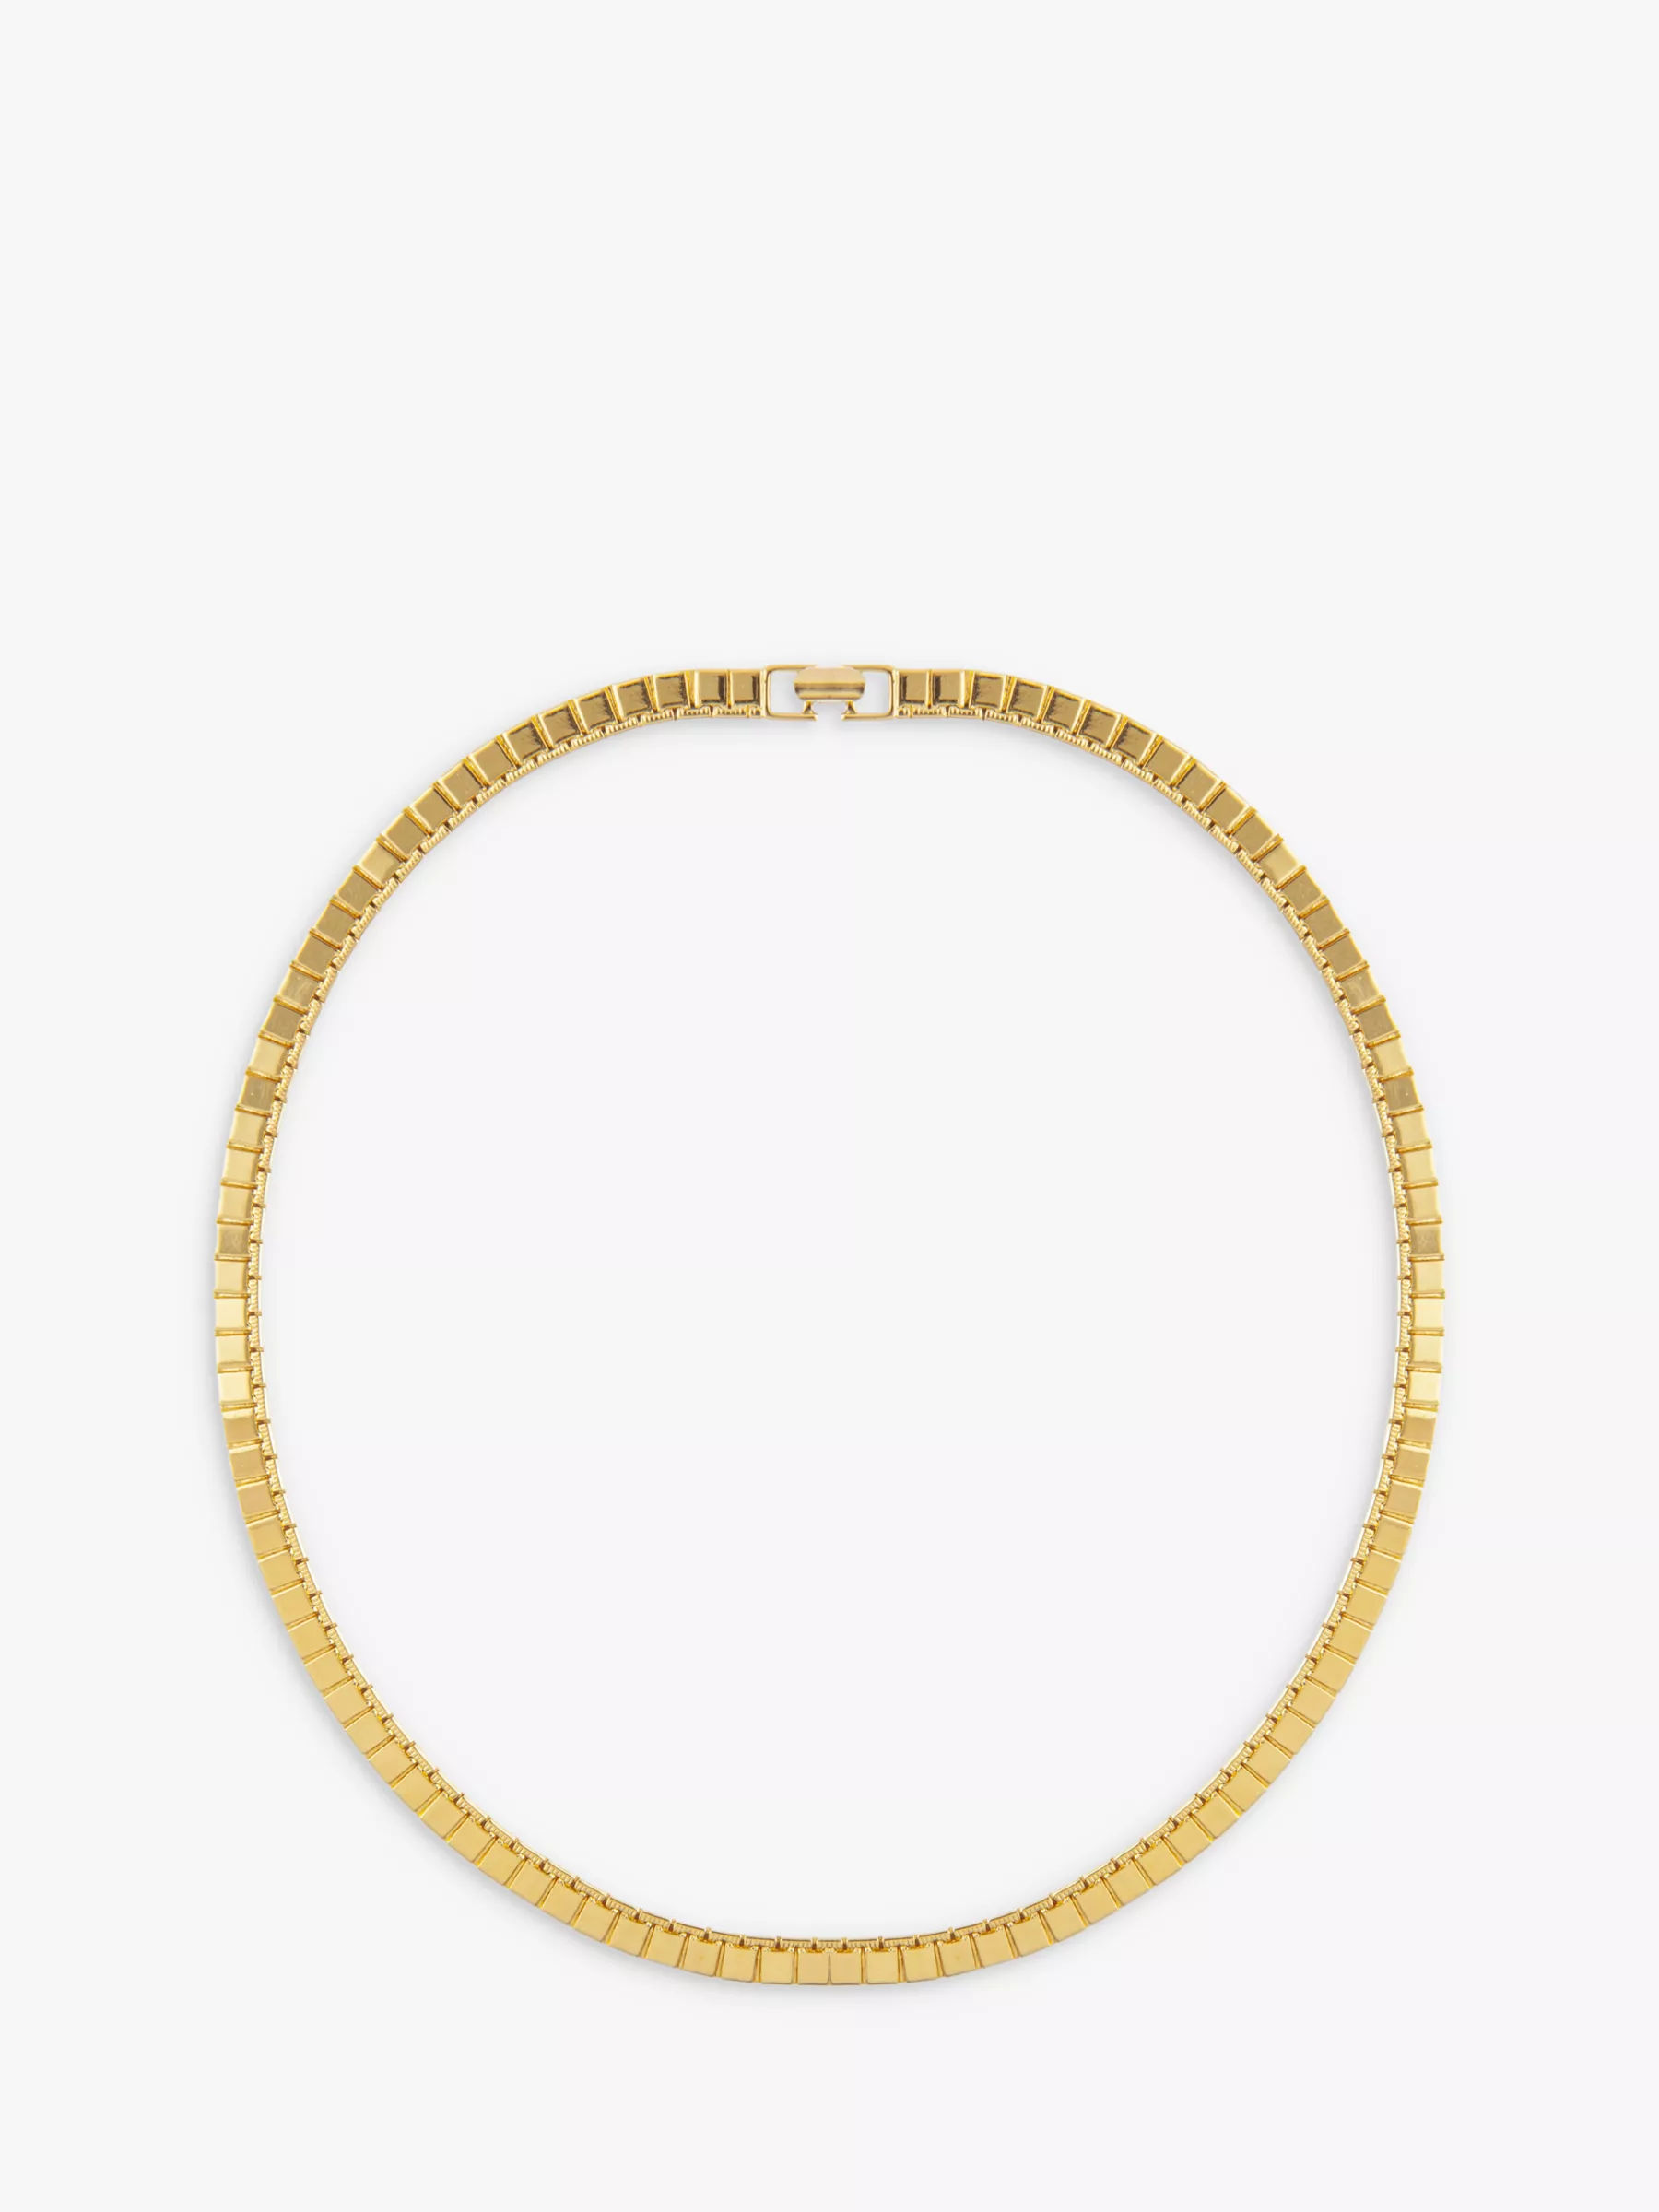 Vintage Gold Collar Necklace Available For Immediate Sale At Sotheby's